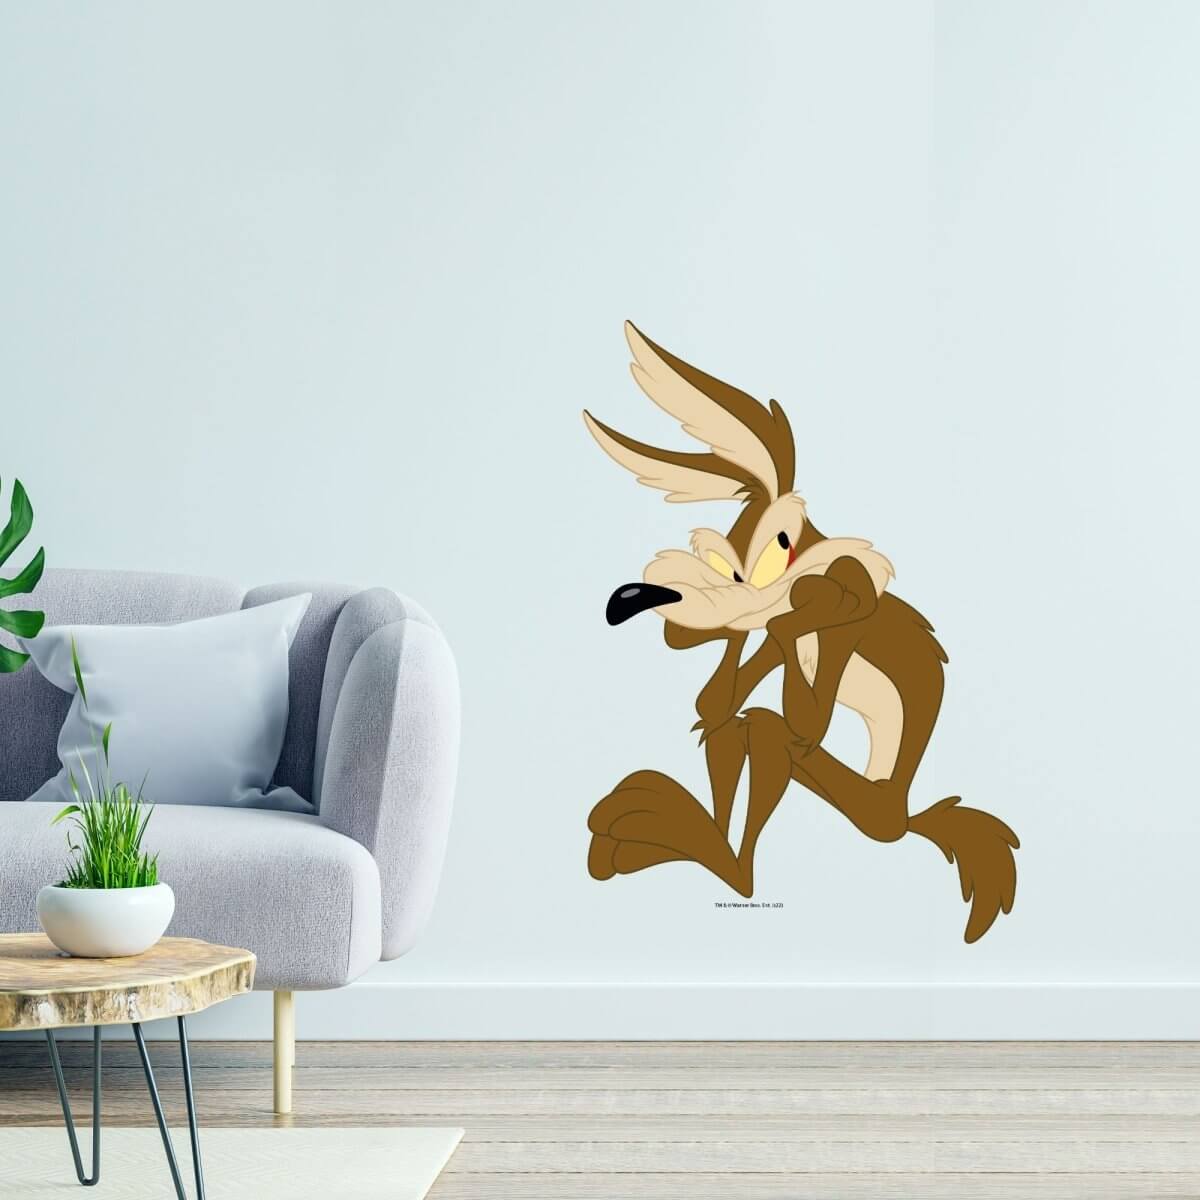 Kismet Decals Looney Tunes Wile. E Master Planner Licensed Wall Sticker - Easy DIY Home & Kids Room Decor Wall Decal Art - Kismet Decals